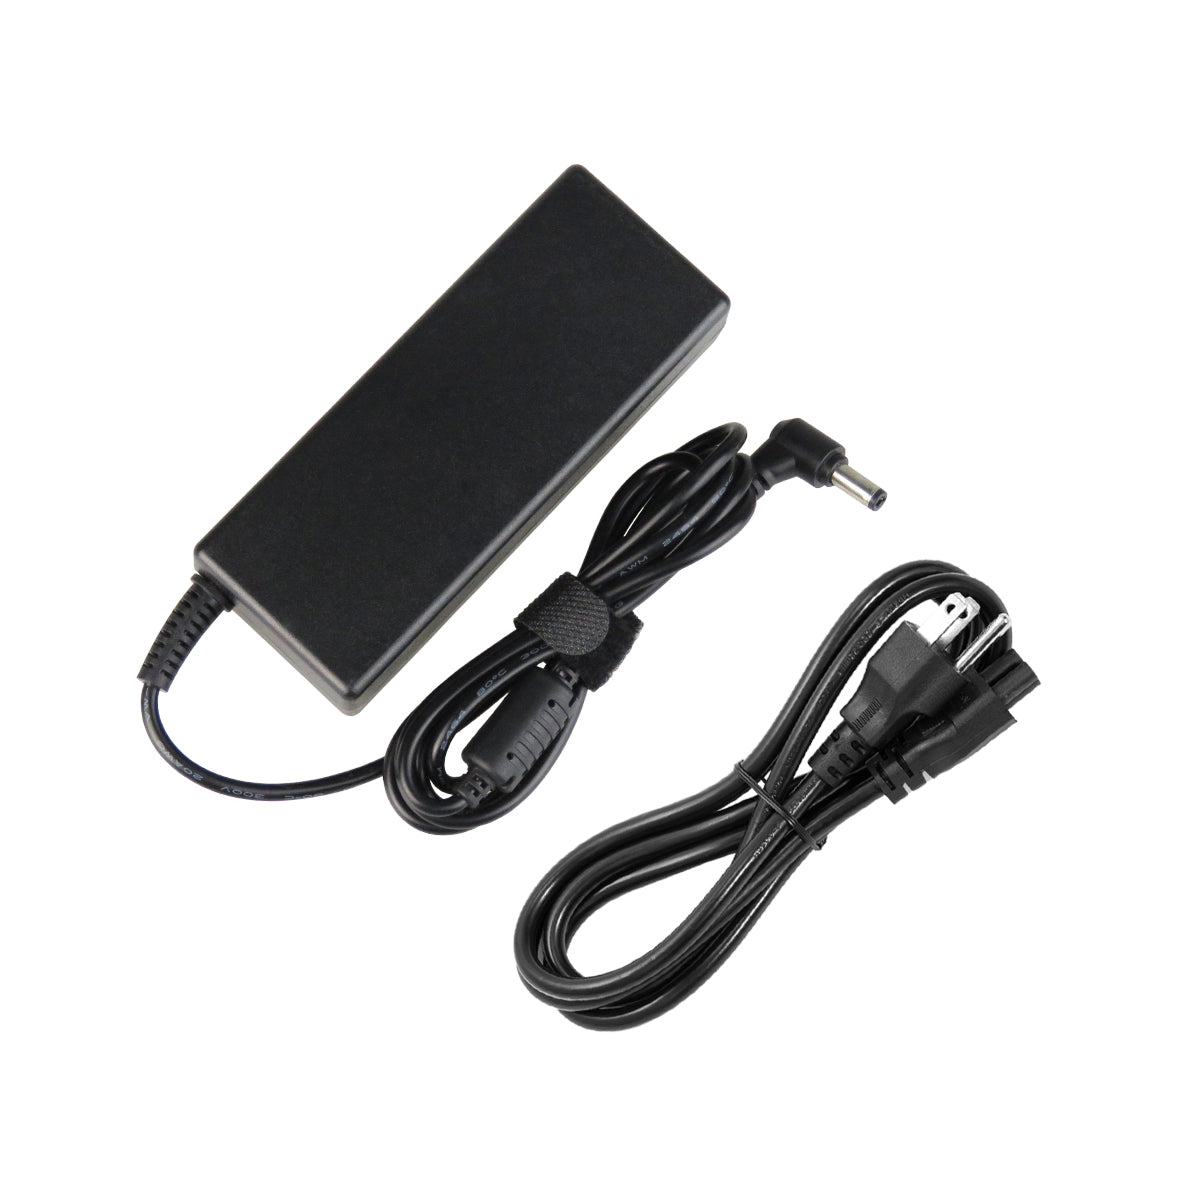 AC Adapter Charger for ASUS X54C-BBK17 Notebook.